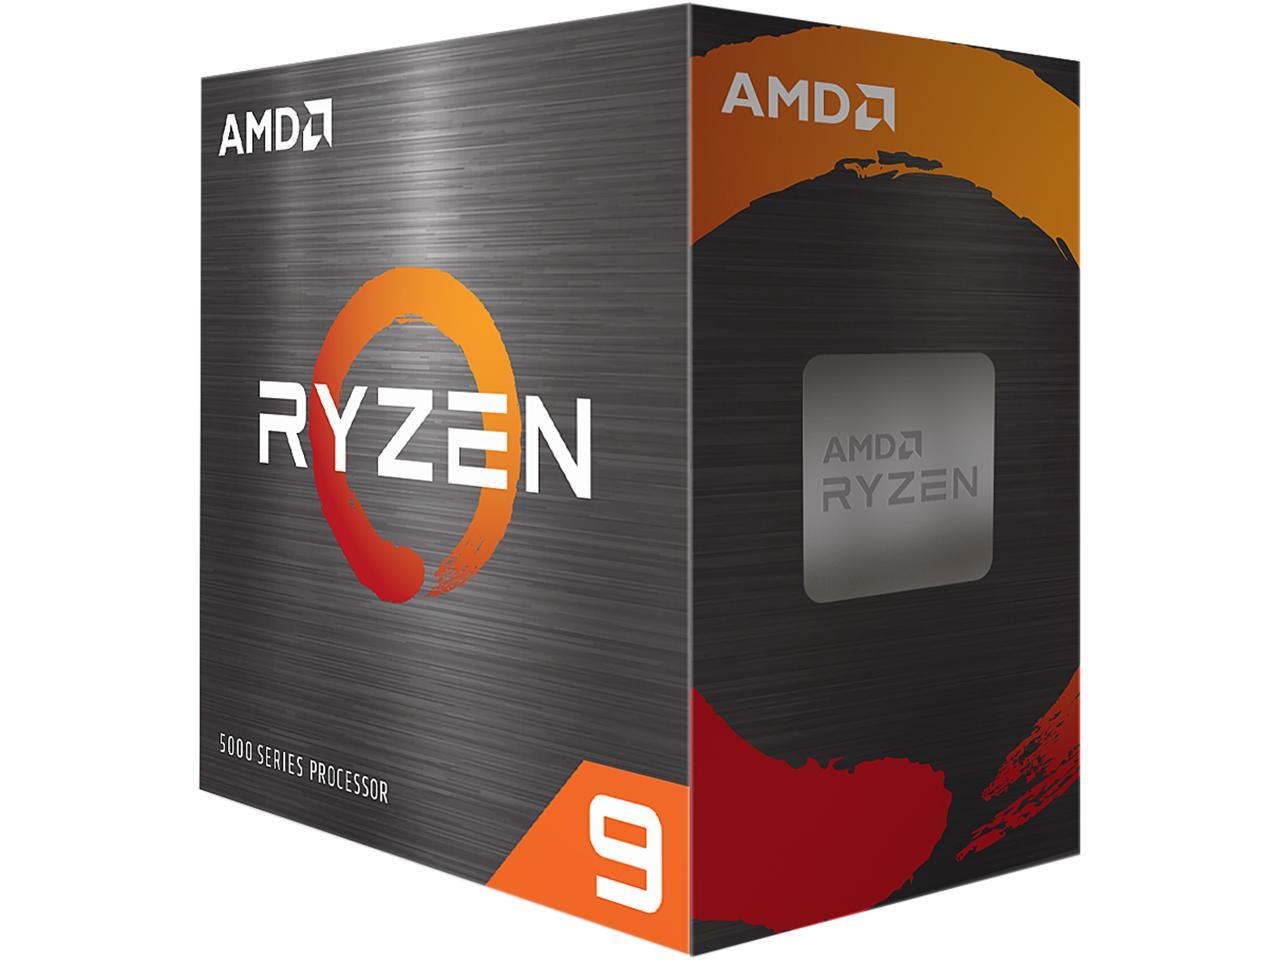 Newegg AMD 5950x $599.98-$50 = $549.98 + tax and free shipping. Must use promo code MBLCATE on mobile app